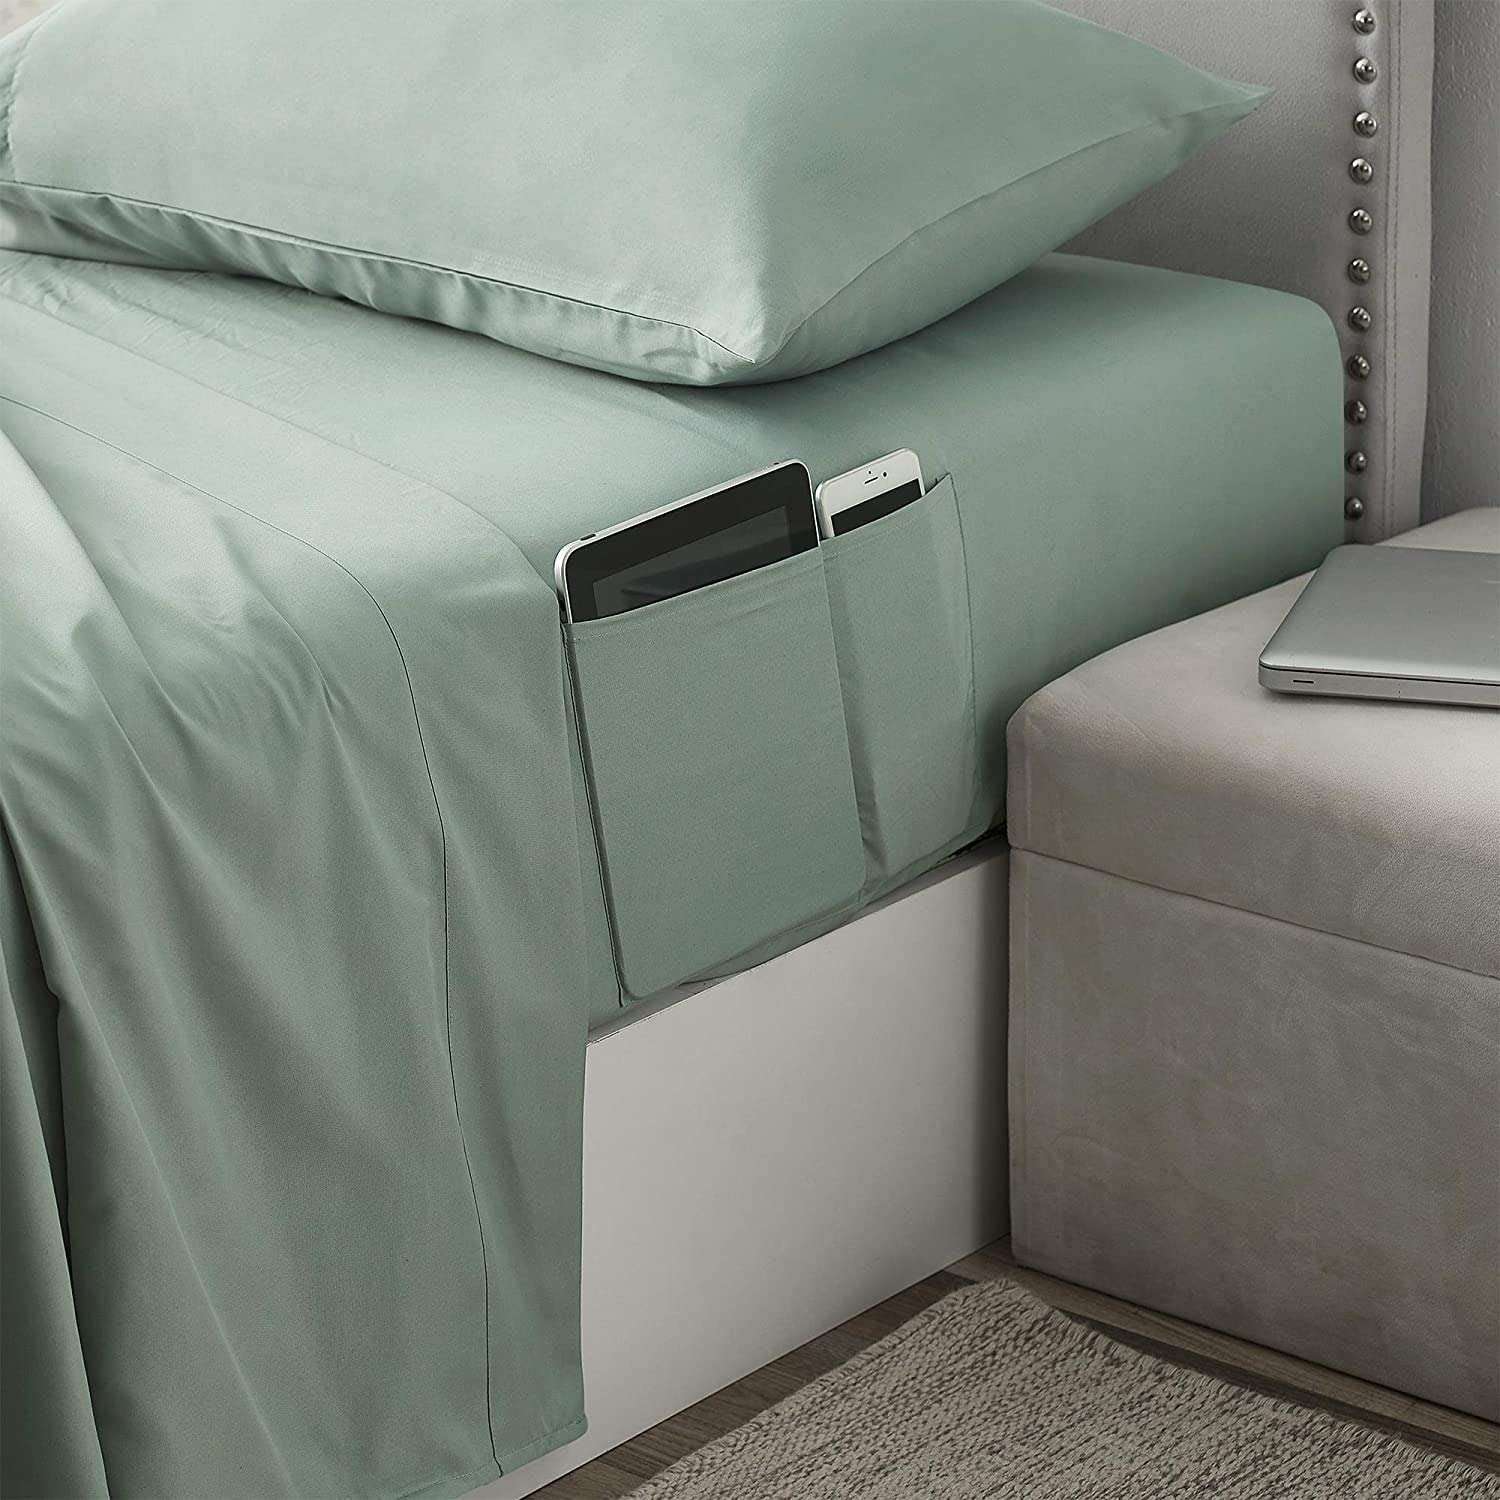 Bed Sheets With Pockets On The Side - Fitted sheets with storage pockets on both sides of bed